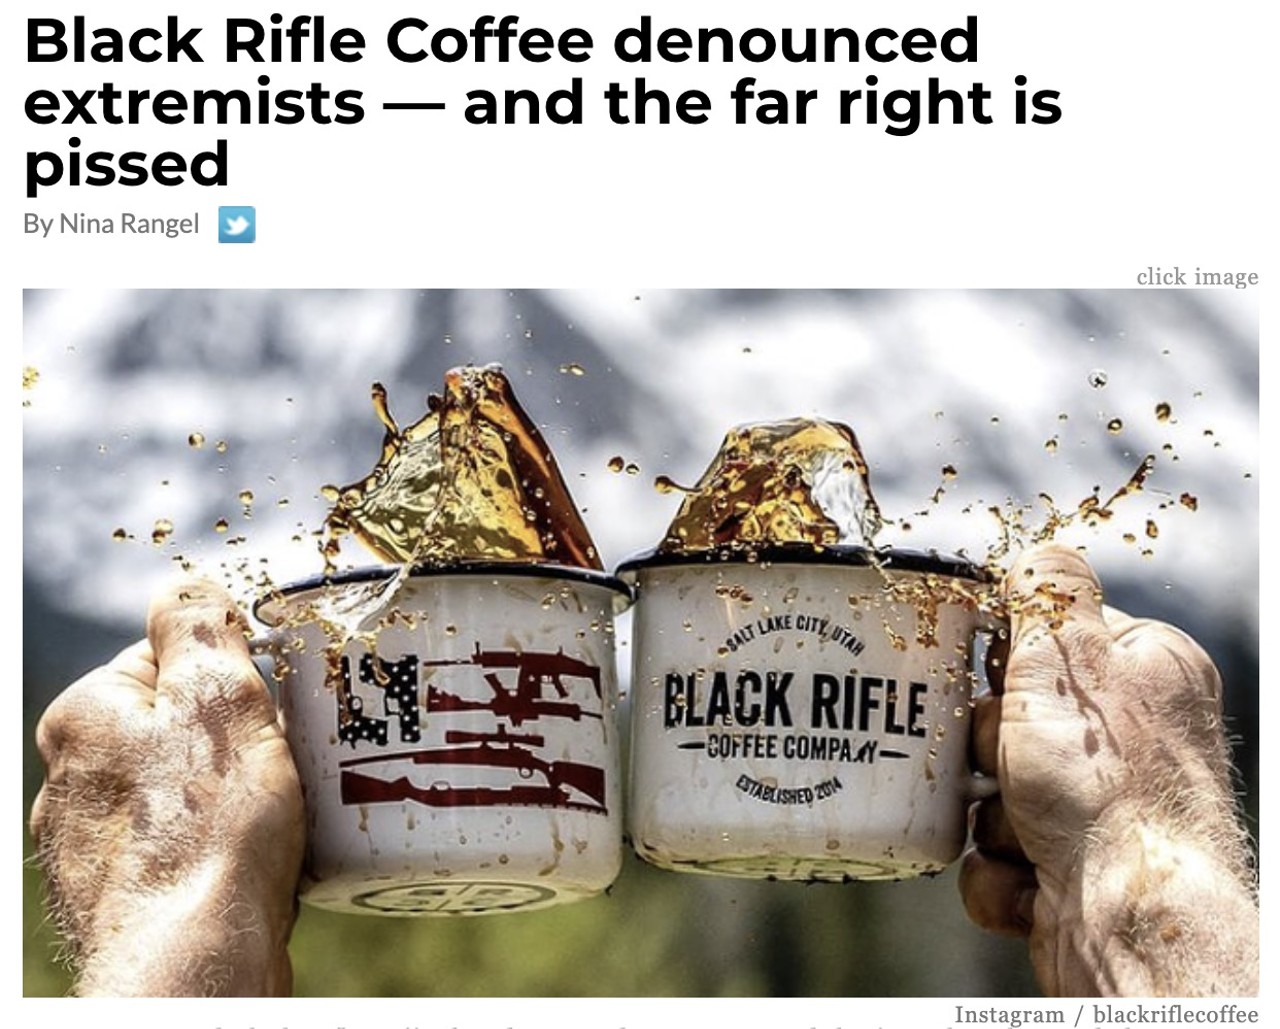 16. Black Rifle Coffee denounced extremists — and the far right is pissed 